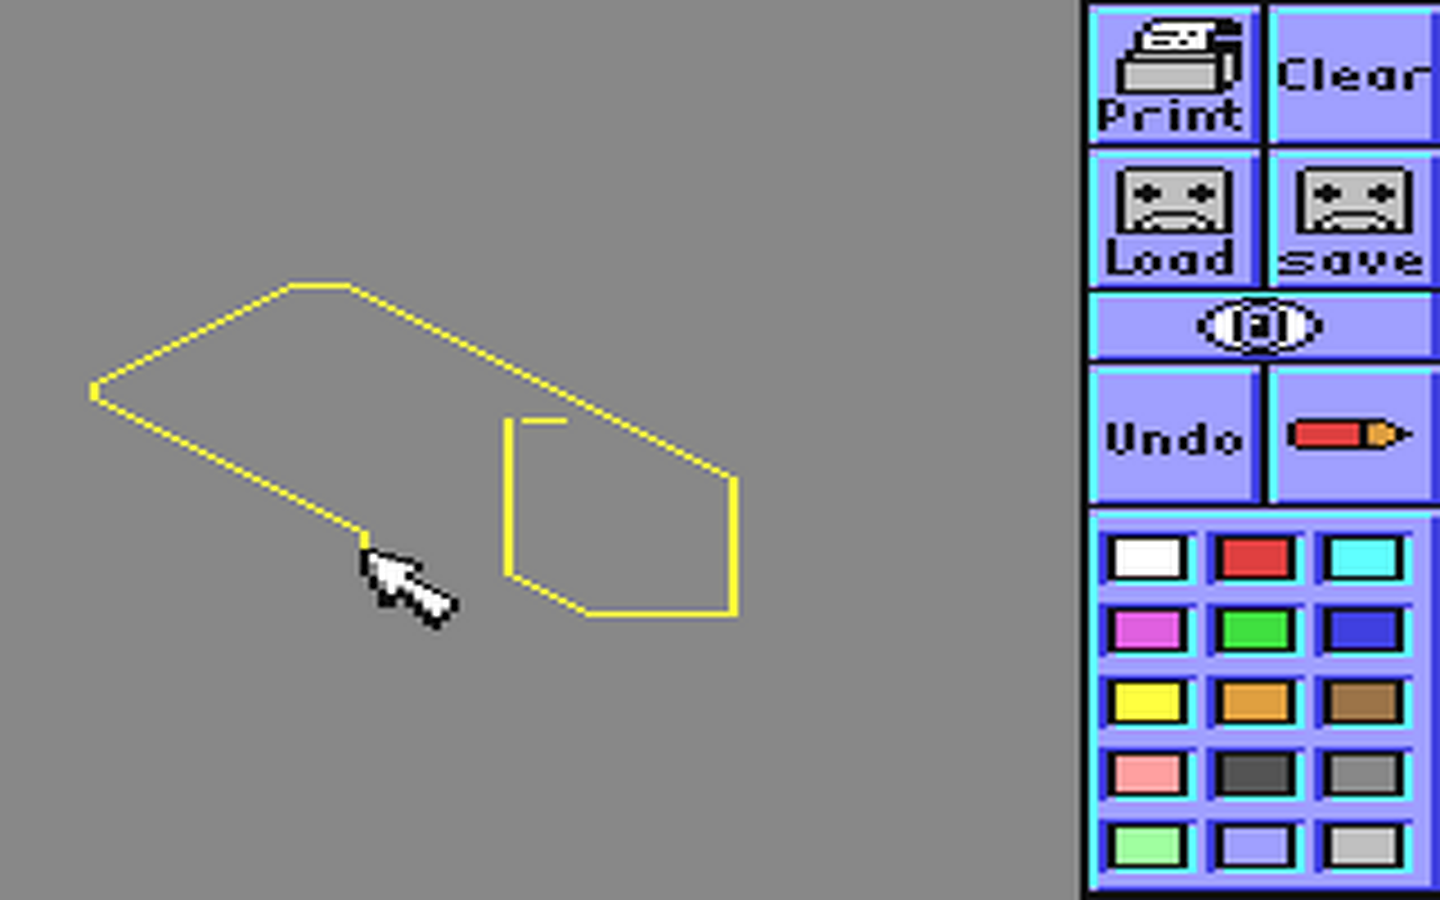 C64 GameBase Fun_School_Special_-_Paint_and_Create EuroPress_Software 1992